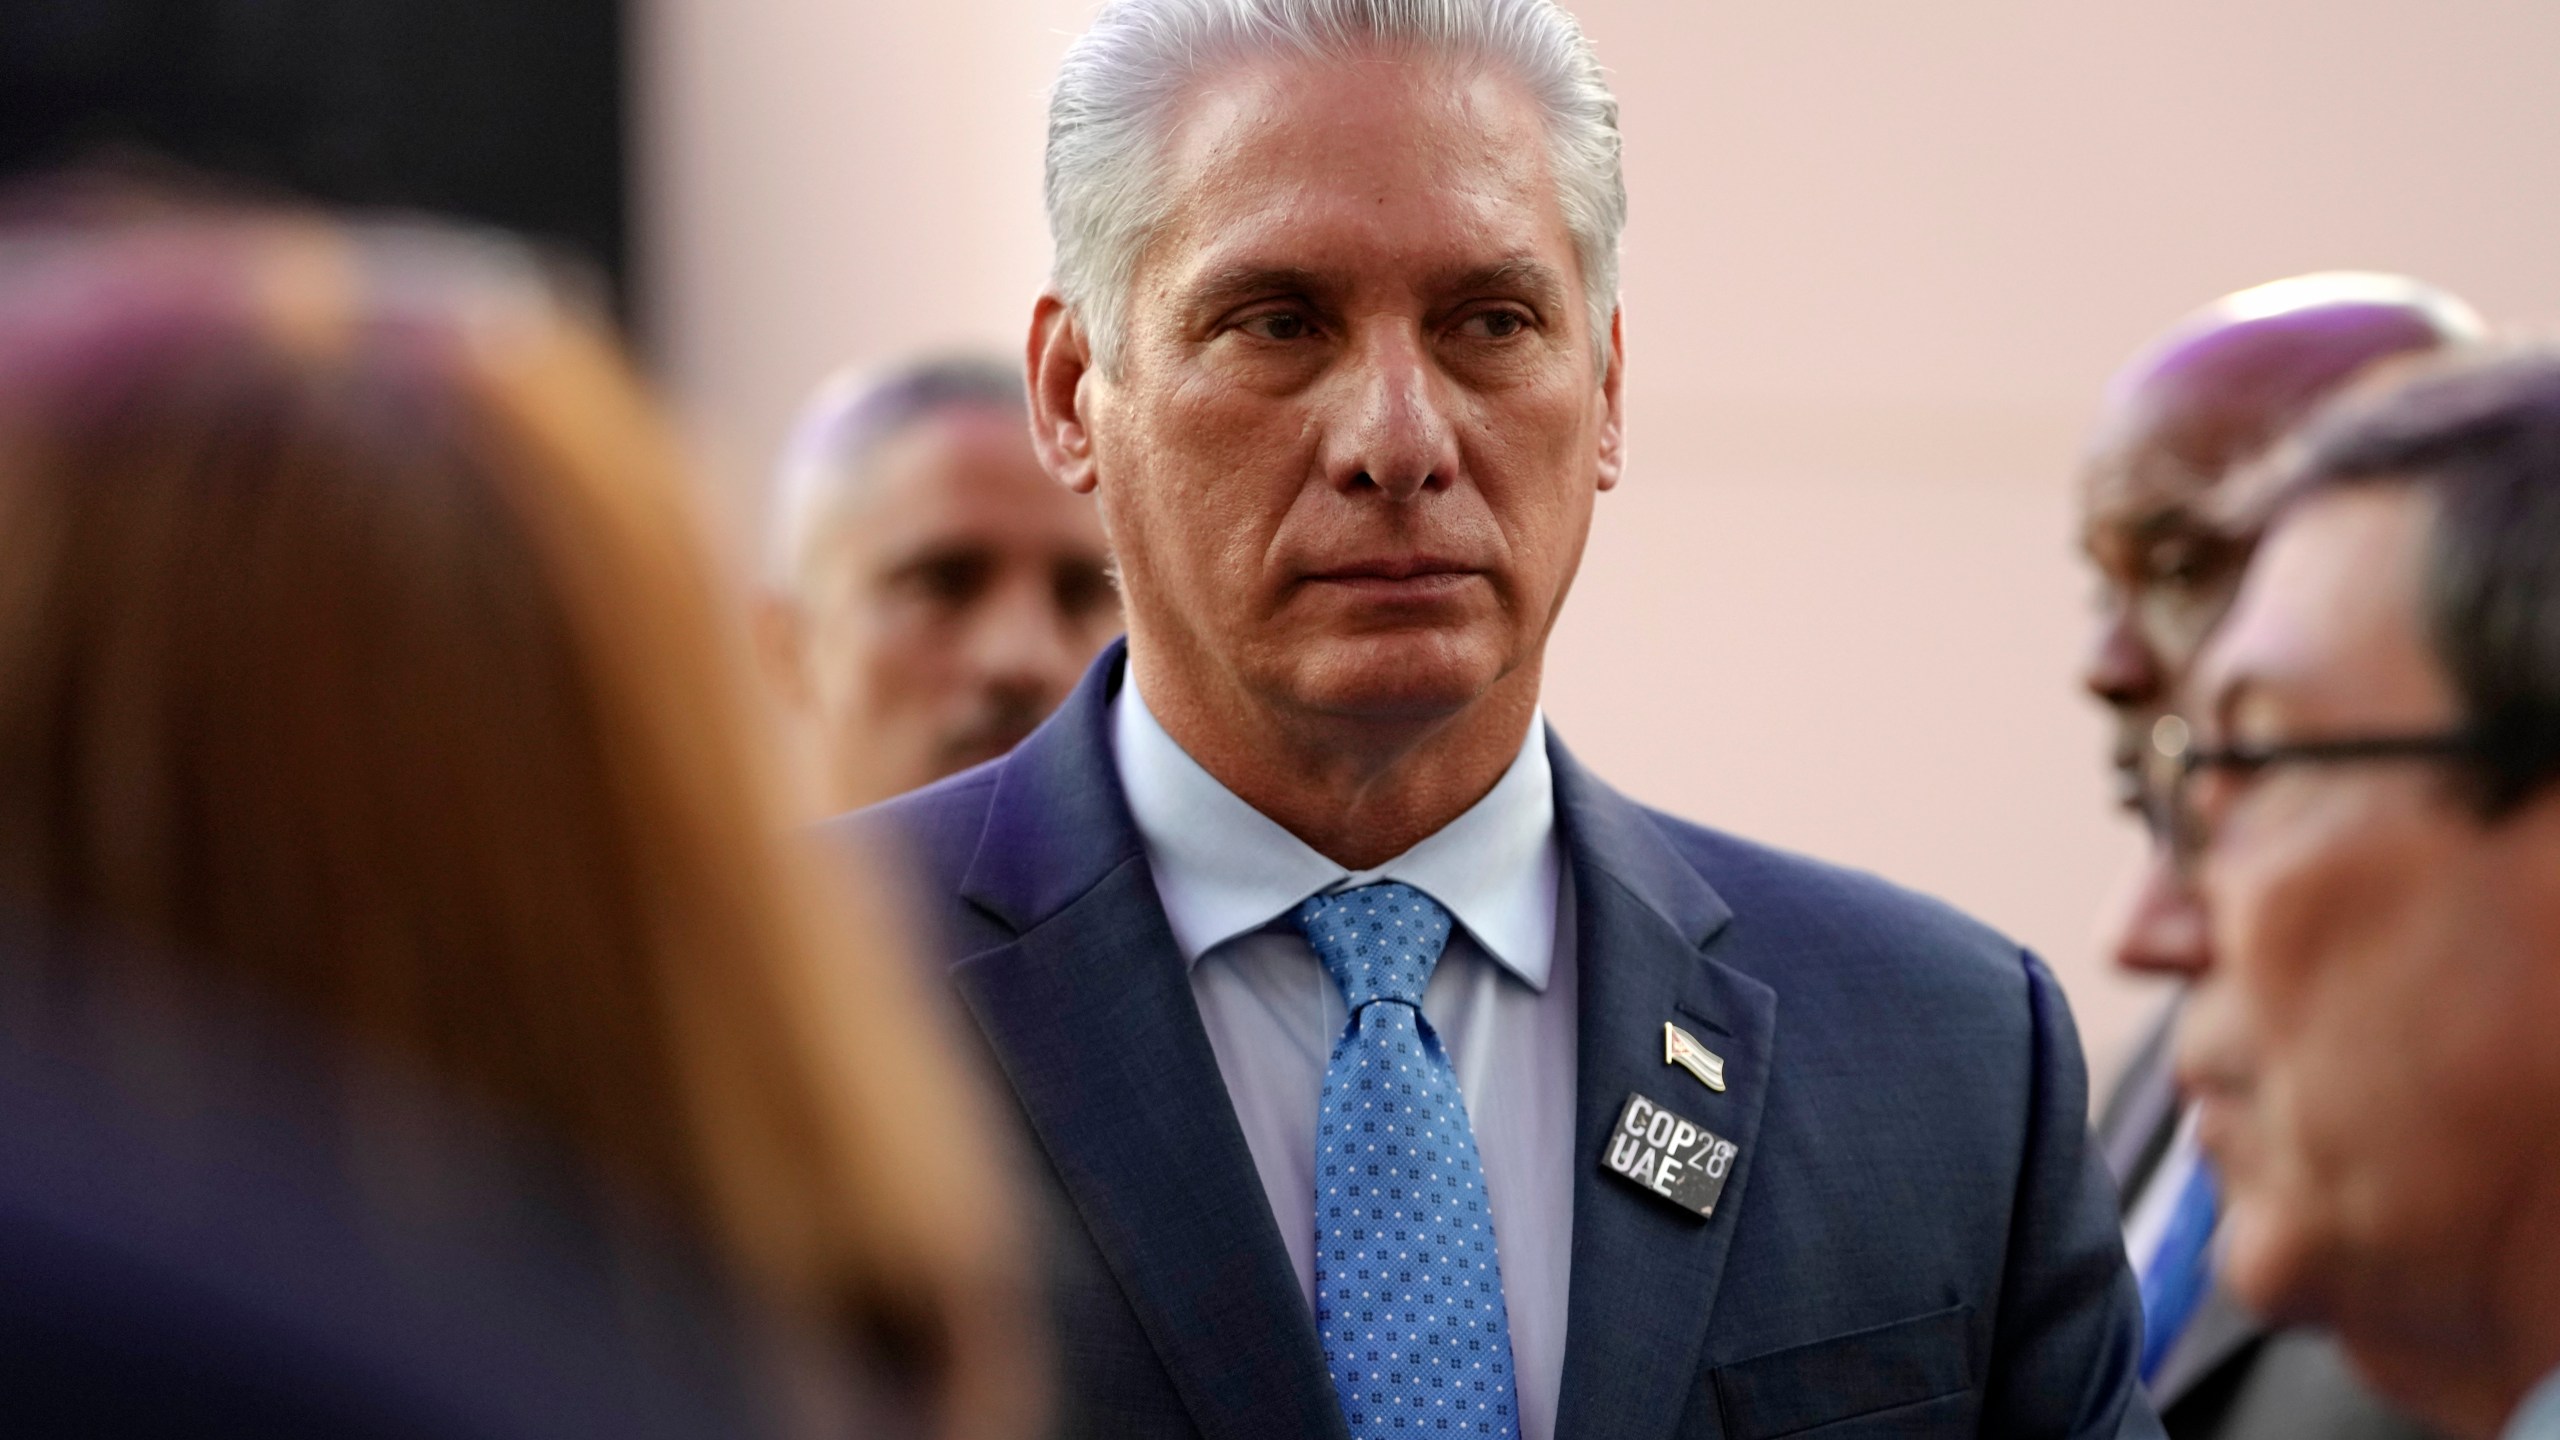 FILE - Cuba President Miguel Diaz-Canel walks through the COP28 U.N. Climate Summit, Saturday, Dec. 2, 2023, in Dubai, United Arab Emirates. Small groups of protesters took to the streets in the eastern city of Santiago on Sunday, March 18, 2024, decrying power outages lasting up to eight hours and food shortages across Cuba. President Miguel Díaz-Canel also referred to protests in a social media post, though he did not specify where they occurred.(AP Photo/Peter Dejong, File)